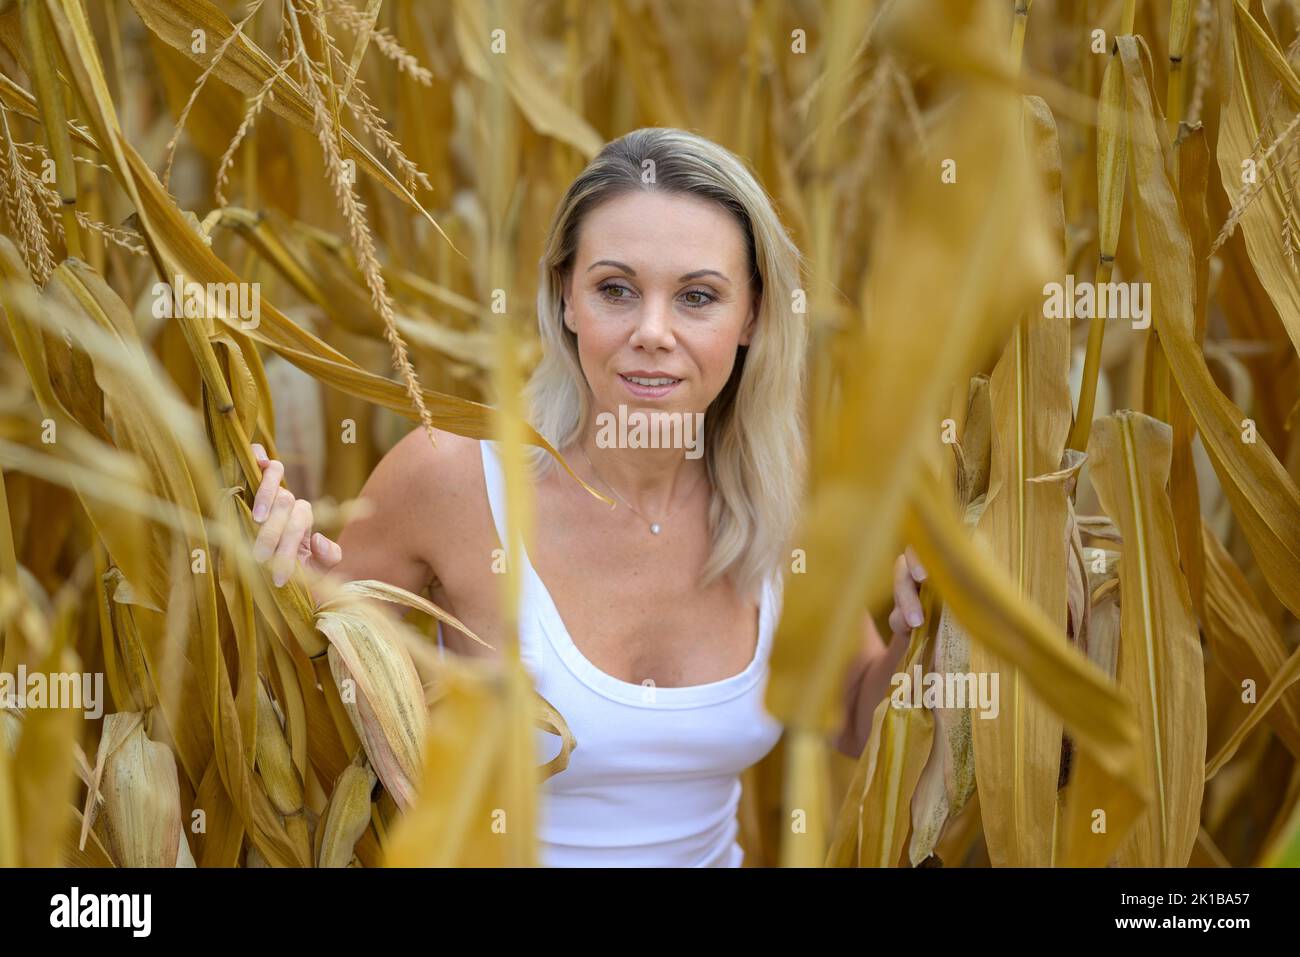 Beautiful attractive blond woman wearing a white top is standing in the middle of a corn field looking to the side smiling Stock Photo